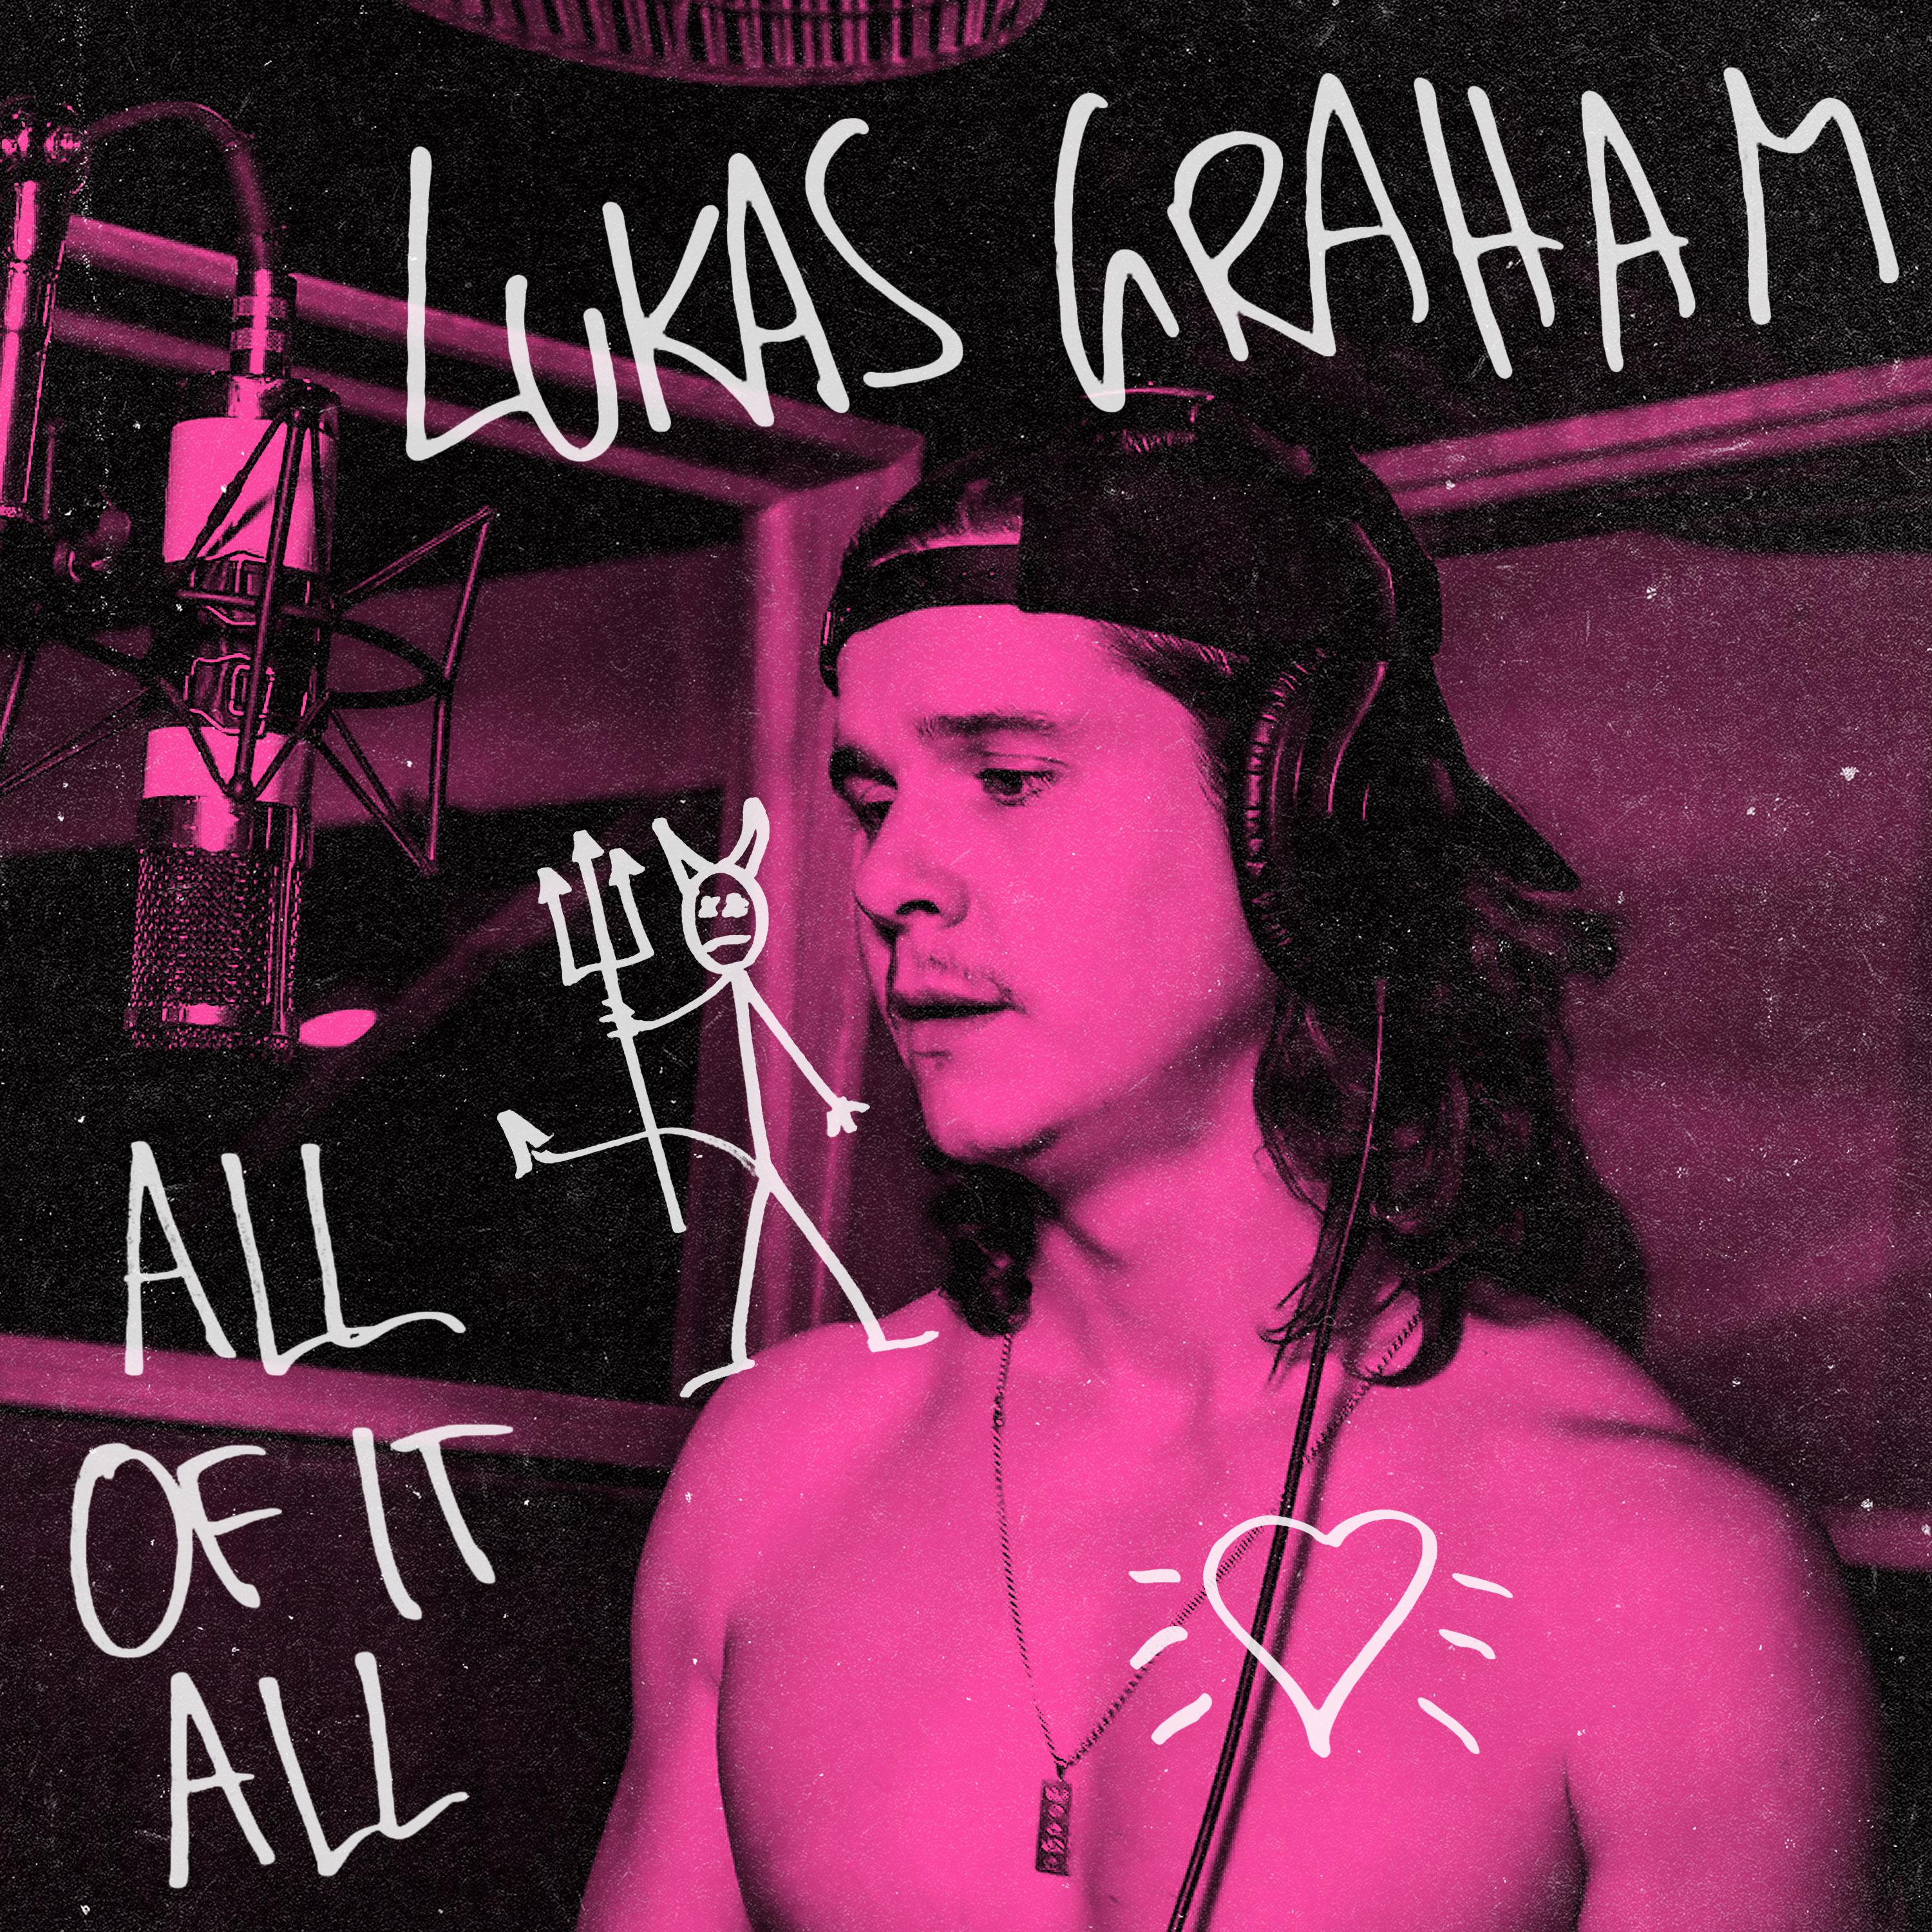 All Of It All歌词 歌手Lukas Graham-专辑All Of It All-单曲《All Of It All》LRC歌词下载